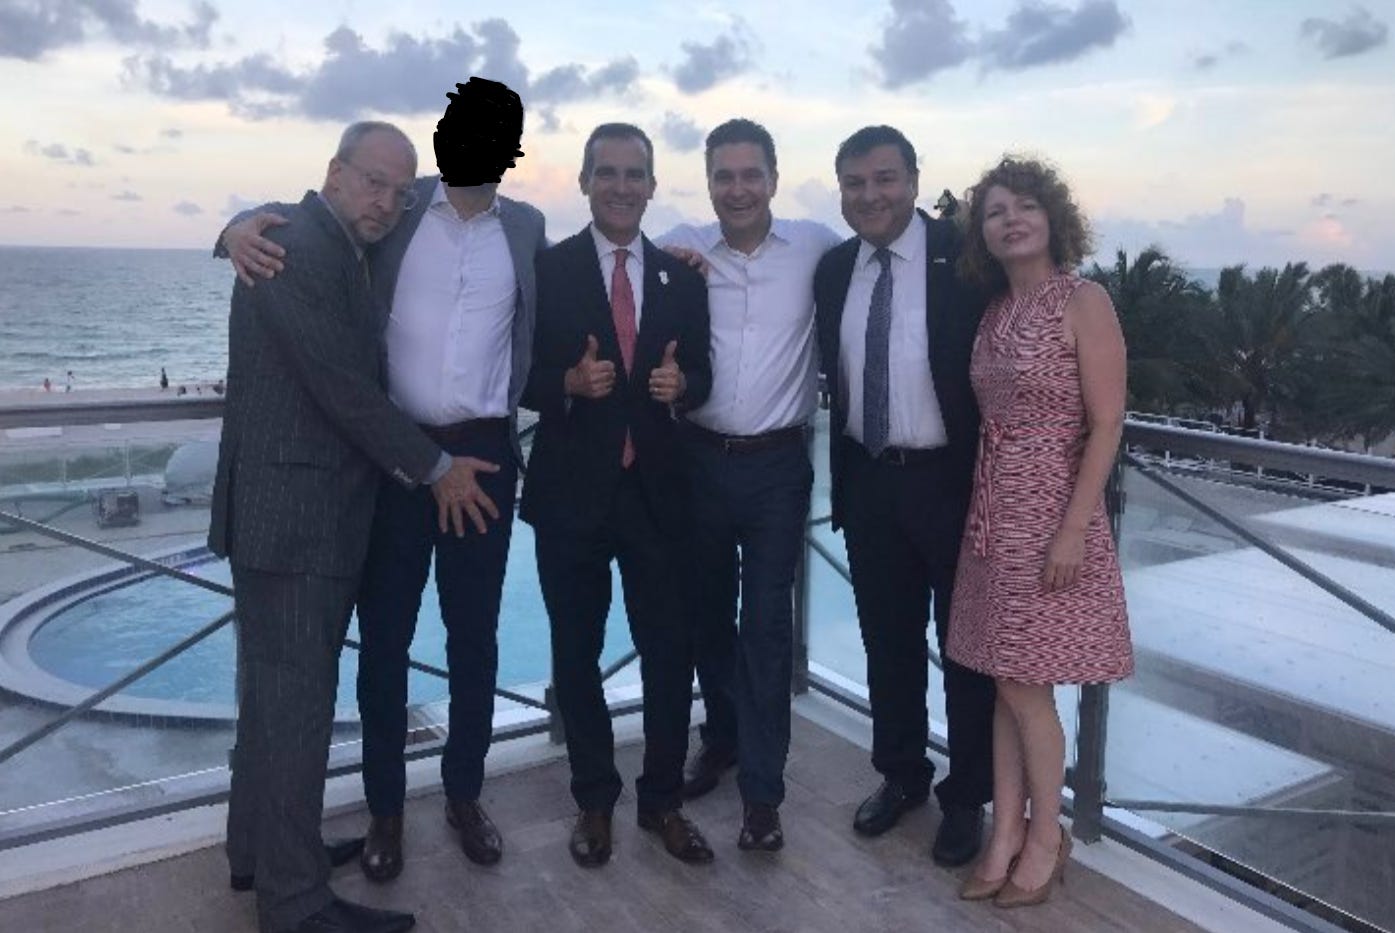 A photo of former Garcetti aide Rick Jacobs making an inappropriate gesture, with Mayor Garcetti giving a thumbs up. There are 6 people in the photo, and an island resort background.